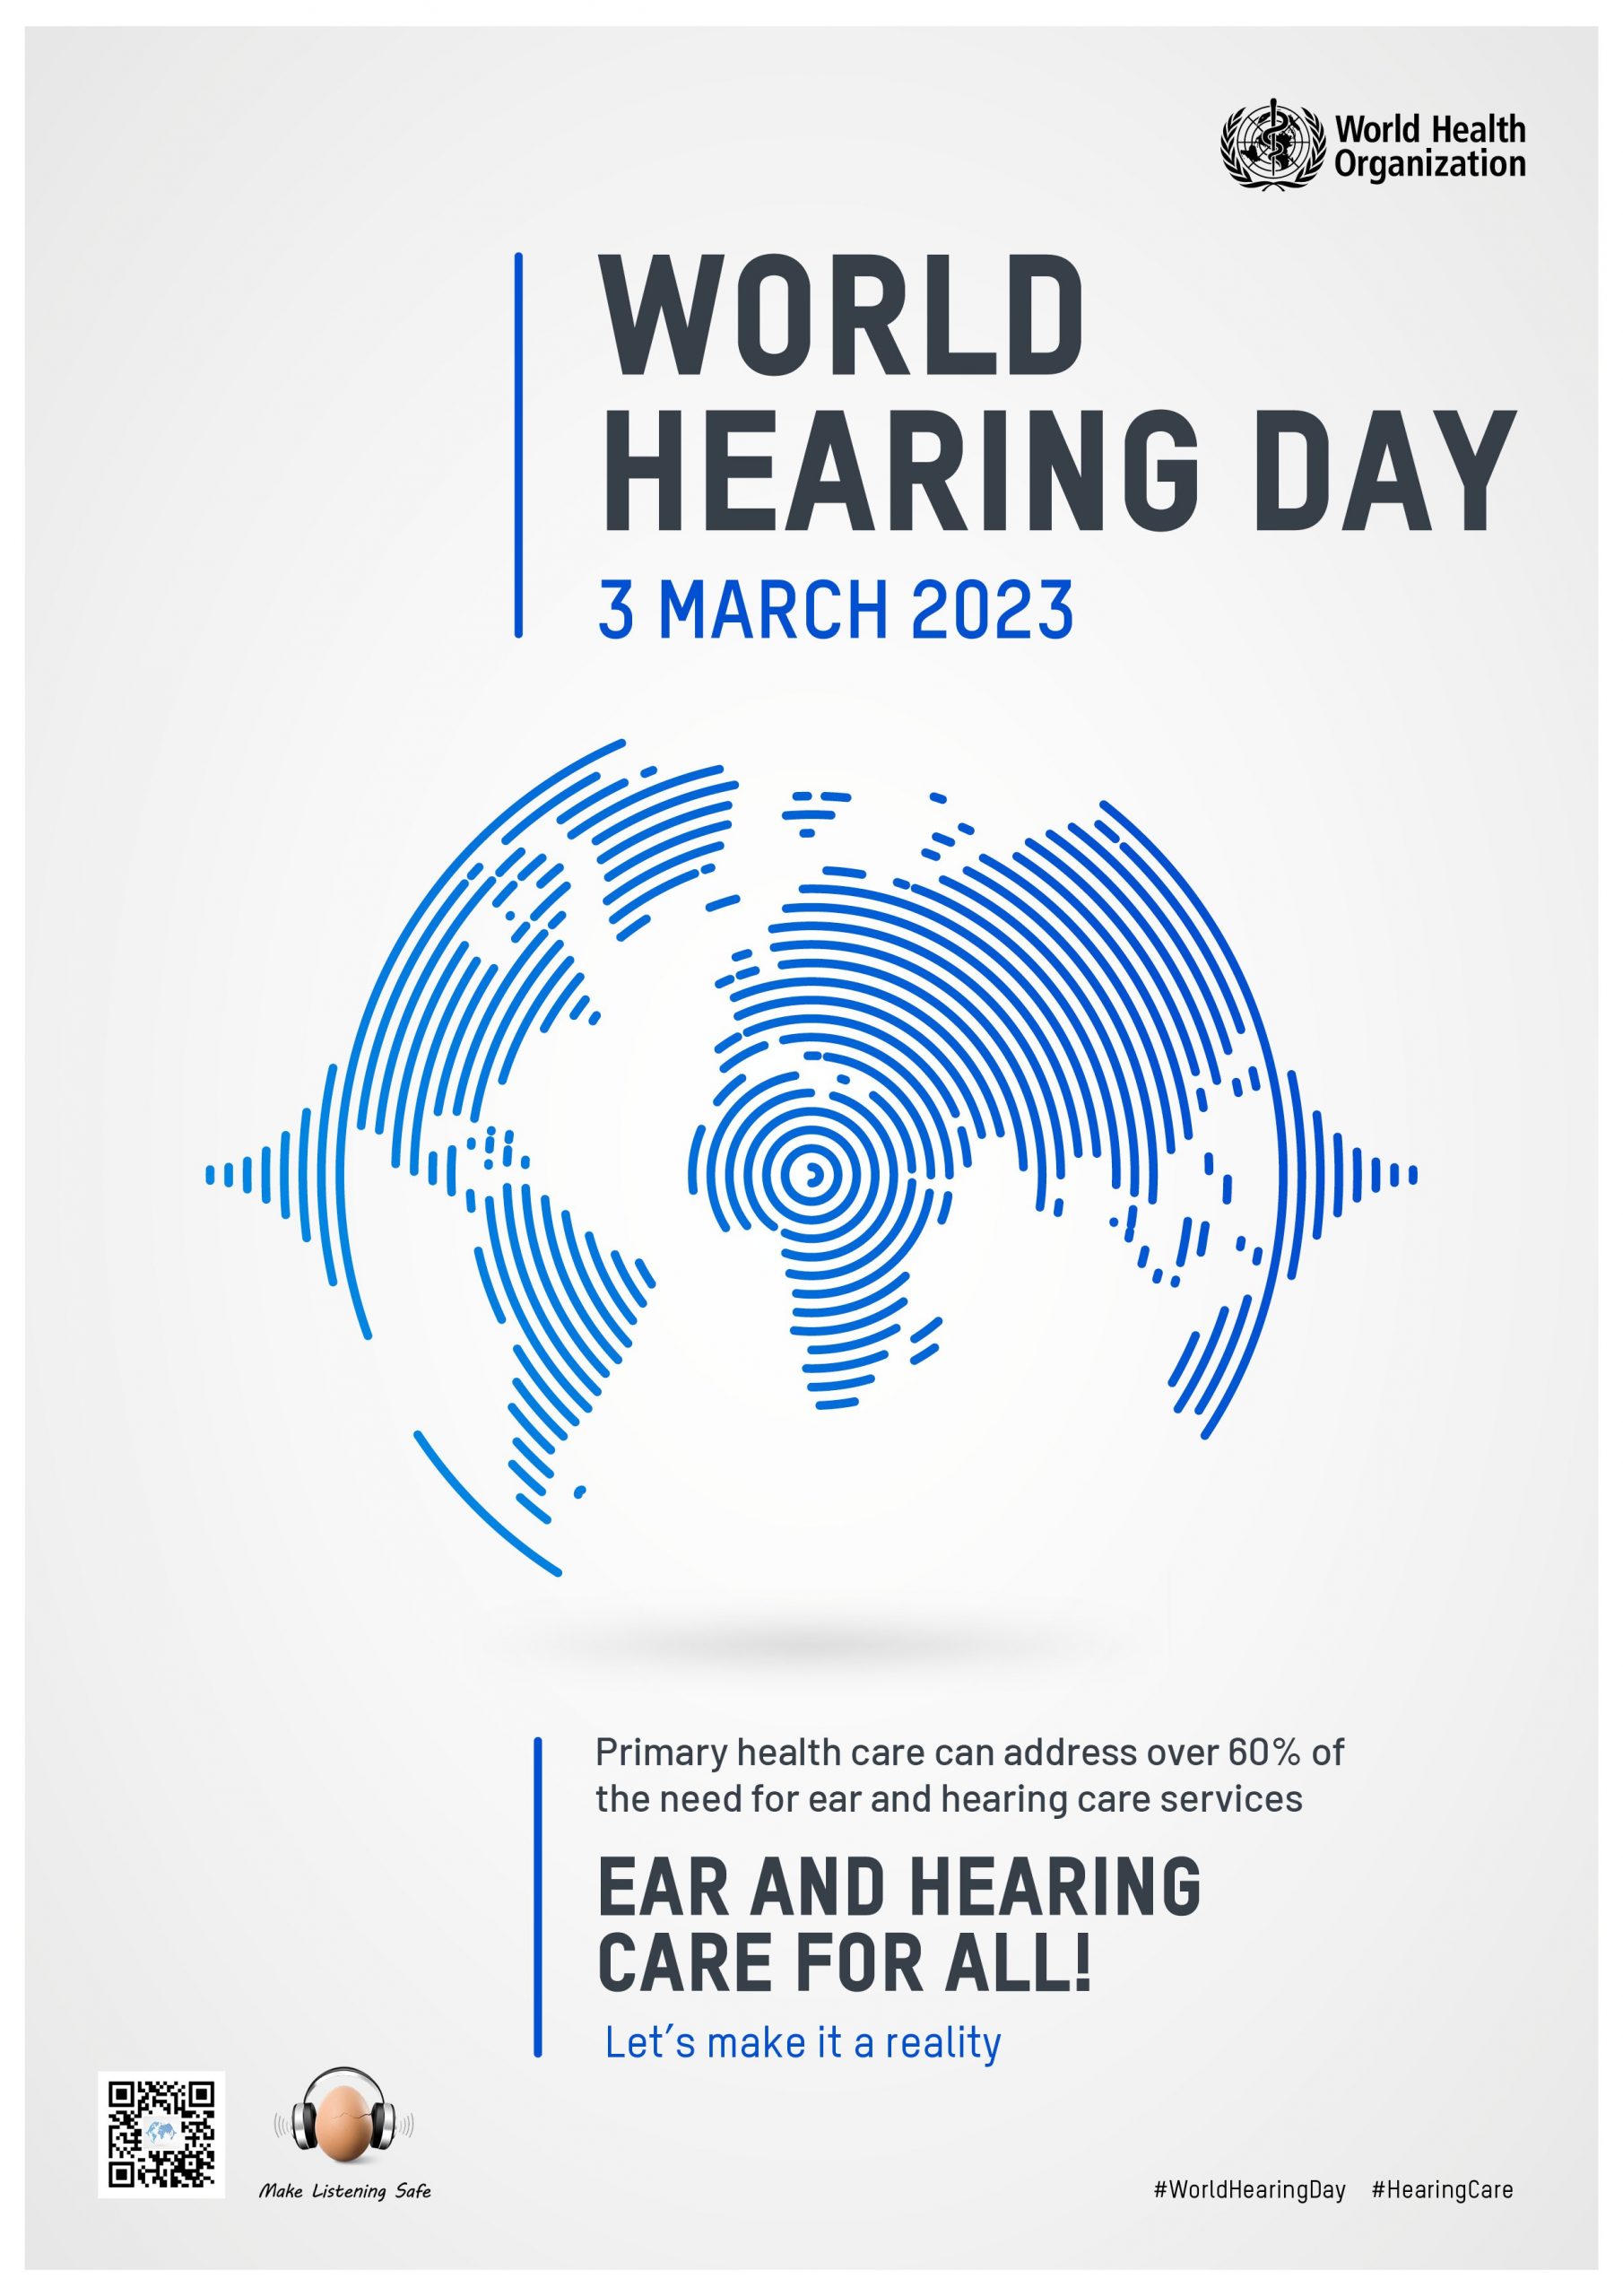 WORLD HEARING DAY 3 MARCH!